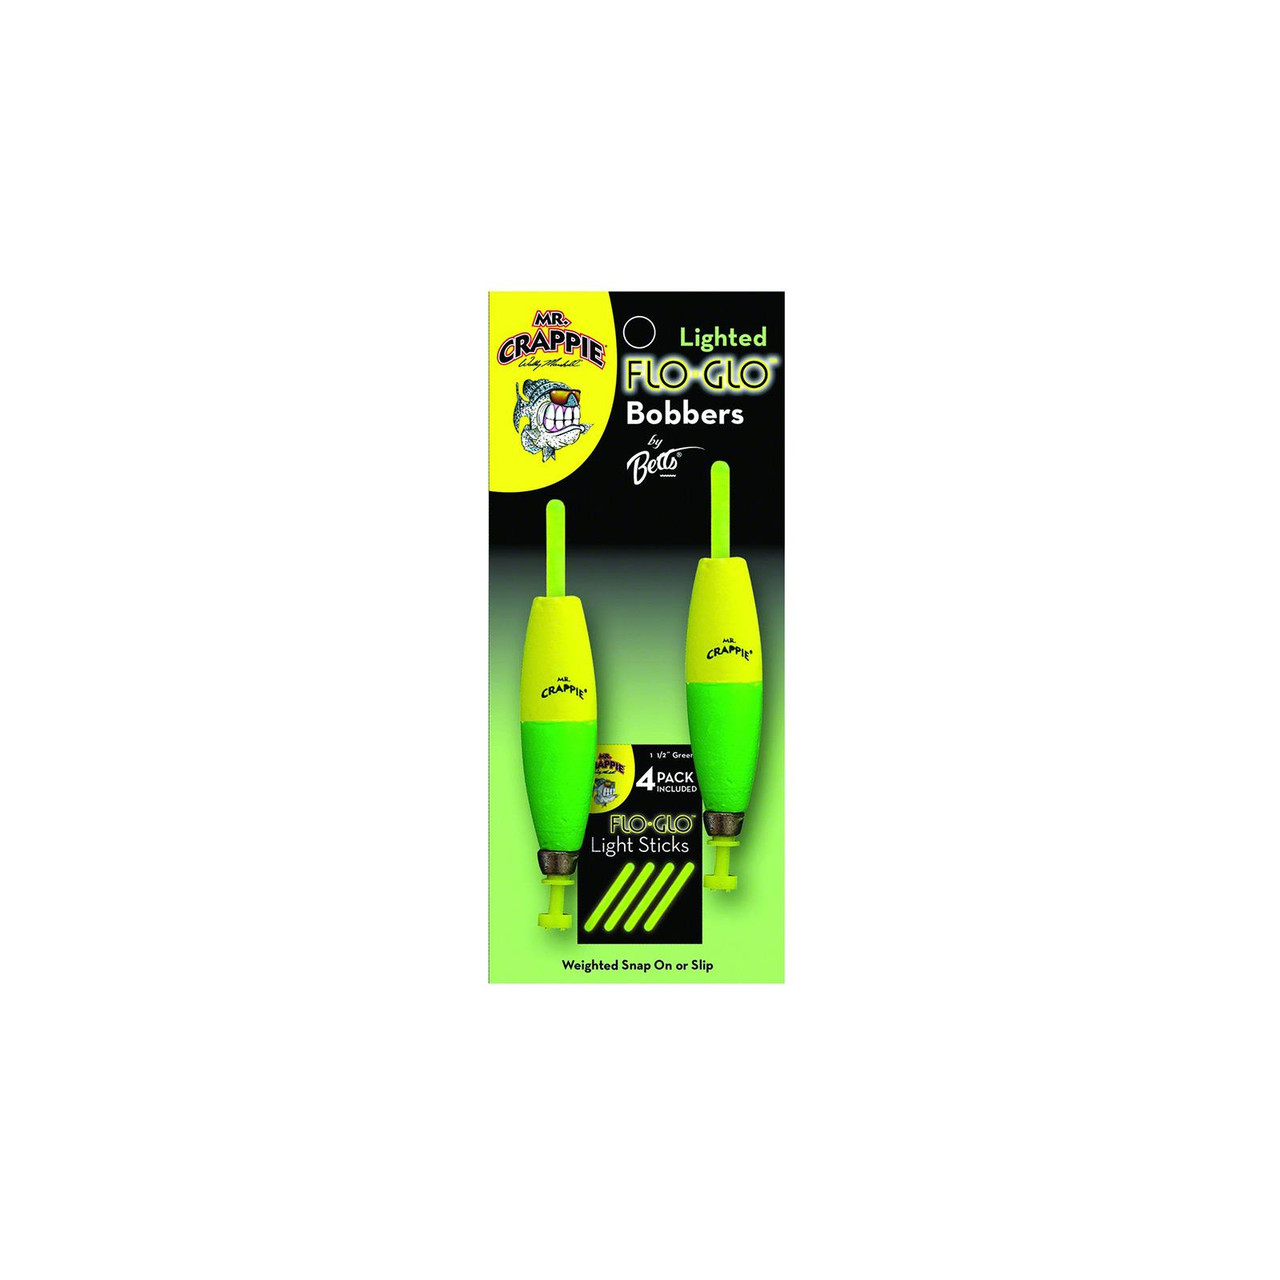 Mr Crappie Lighted Flo Glo Floats - Fin Feather Fur Outfitters